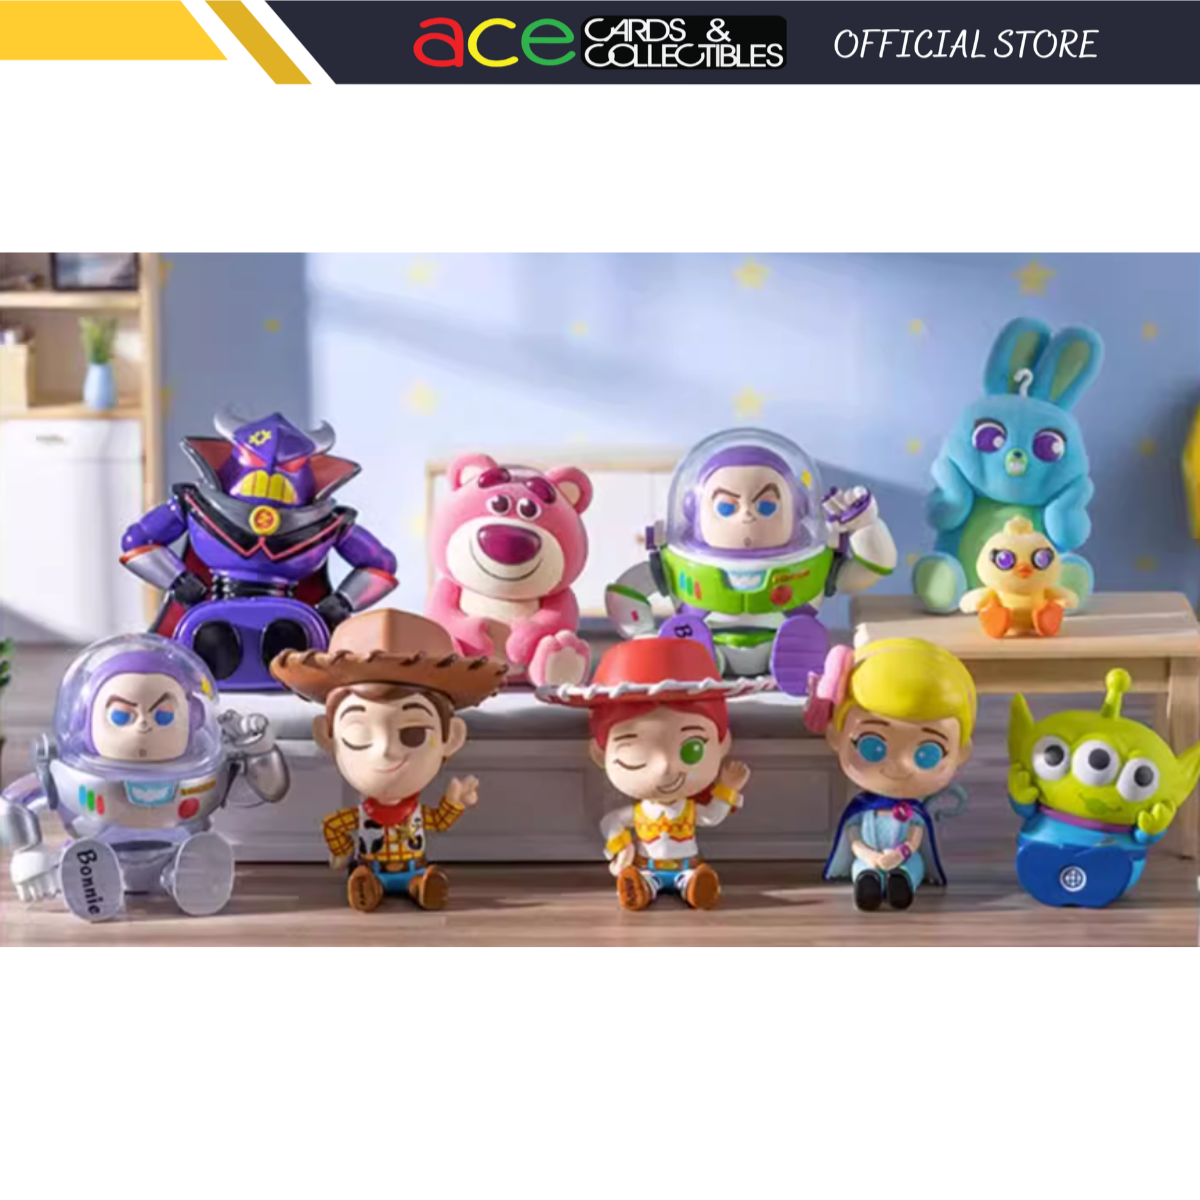 Miniso x Disney Toy Story Sit Nicely Series-Single Box (Random)-Miniso-Ace Cards & Collectibles